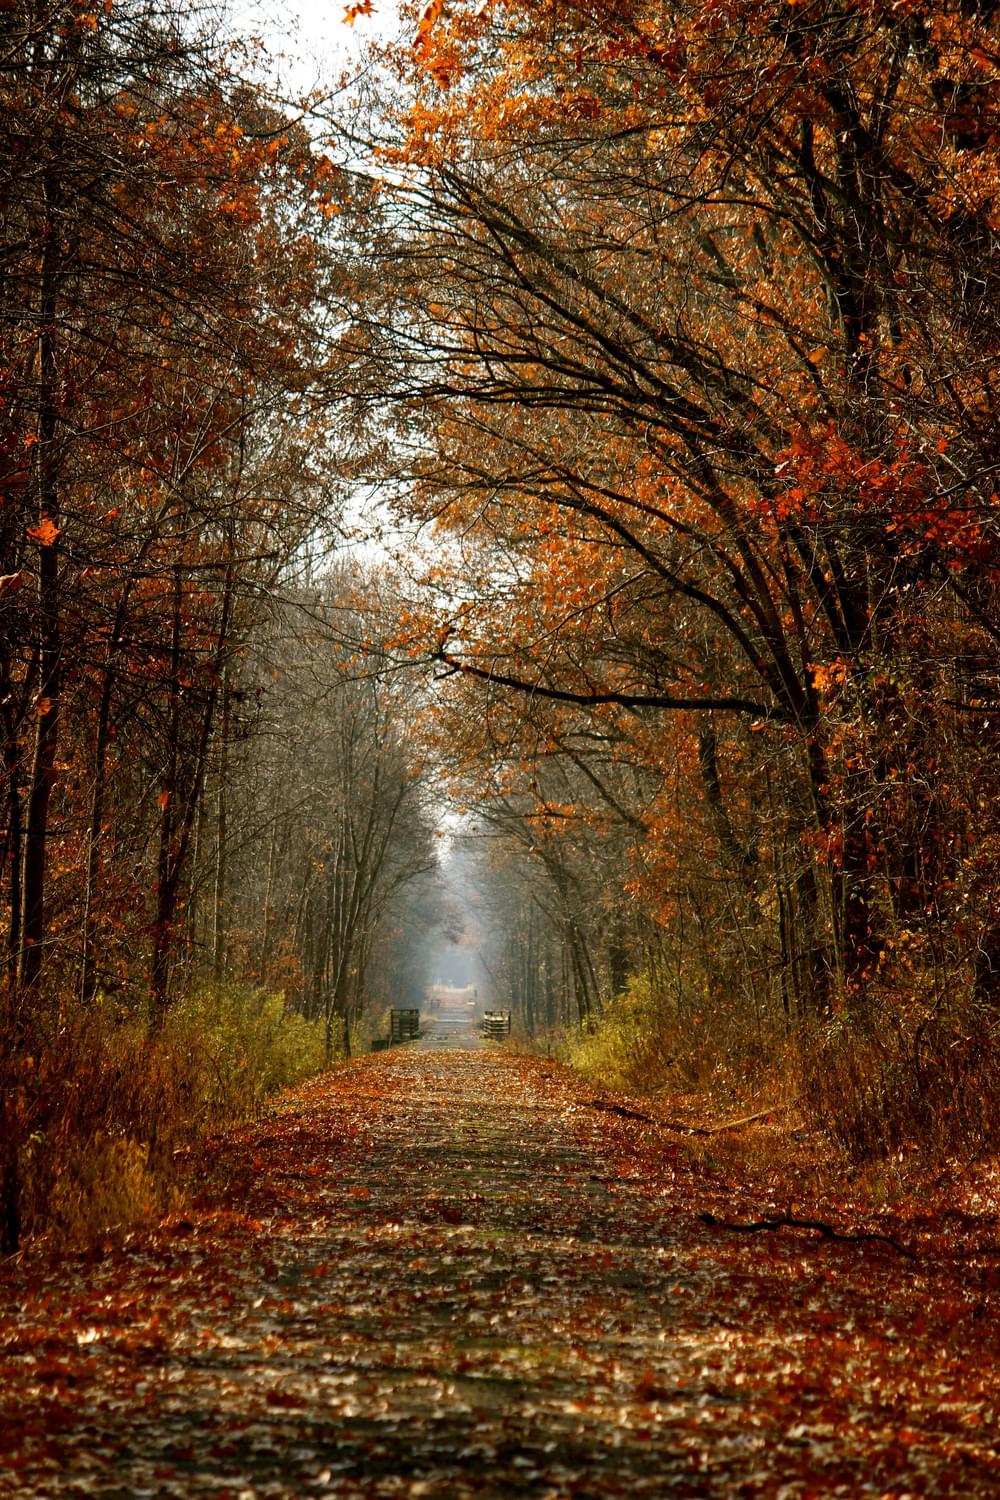 The Tunnel Hill State Trail is built on a former railroad in Johnson County, southernmost Illinois